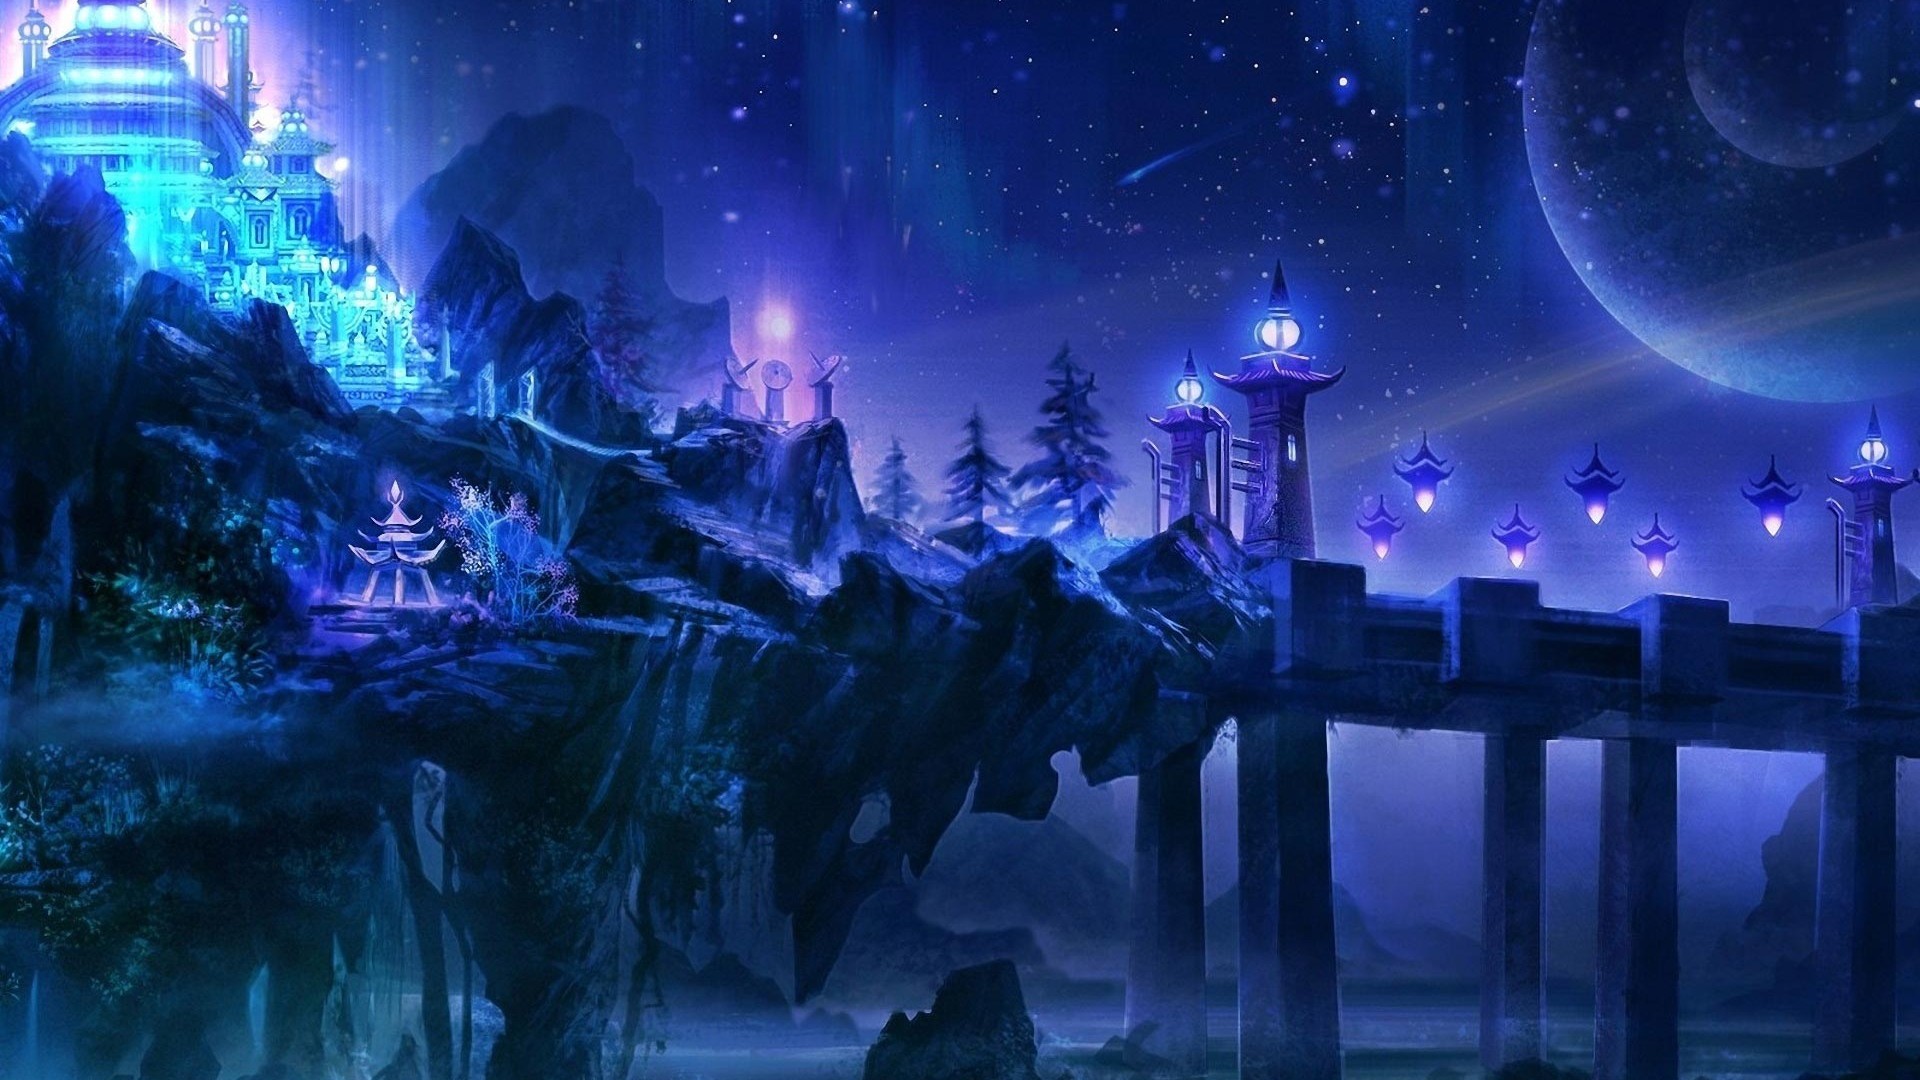 Fantasy Desktop Backgrounds HD With high-resolution 1920X1080 pixel. You can use this wallpaper for your Windows and Mac OS computers as well as your Android and iPhone smartphones